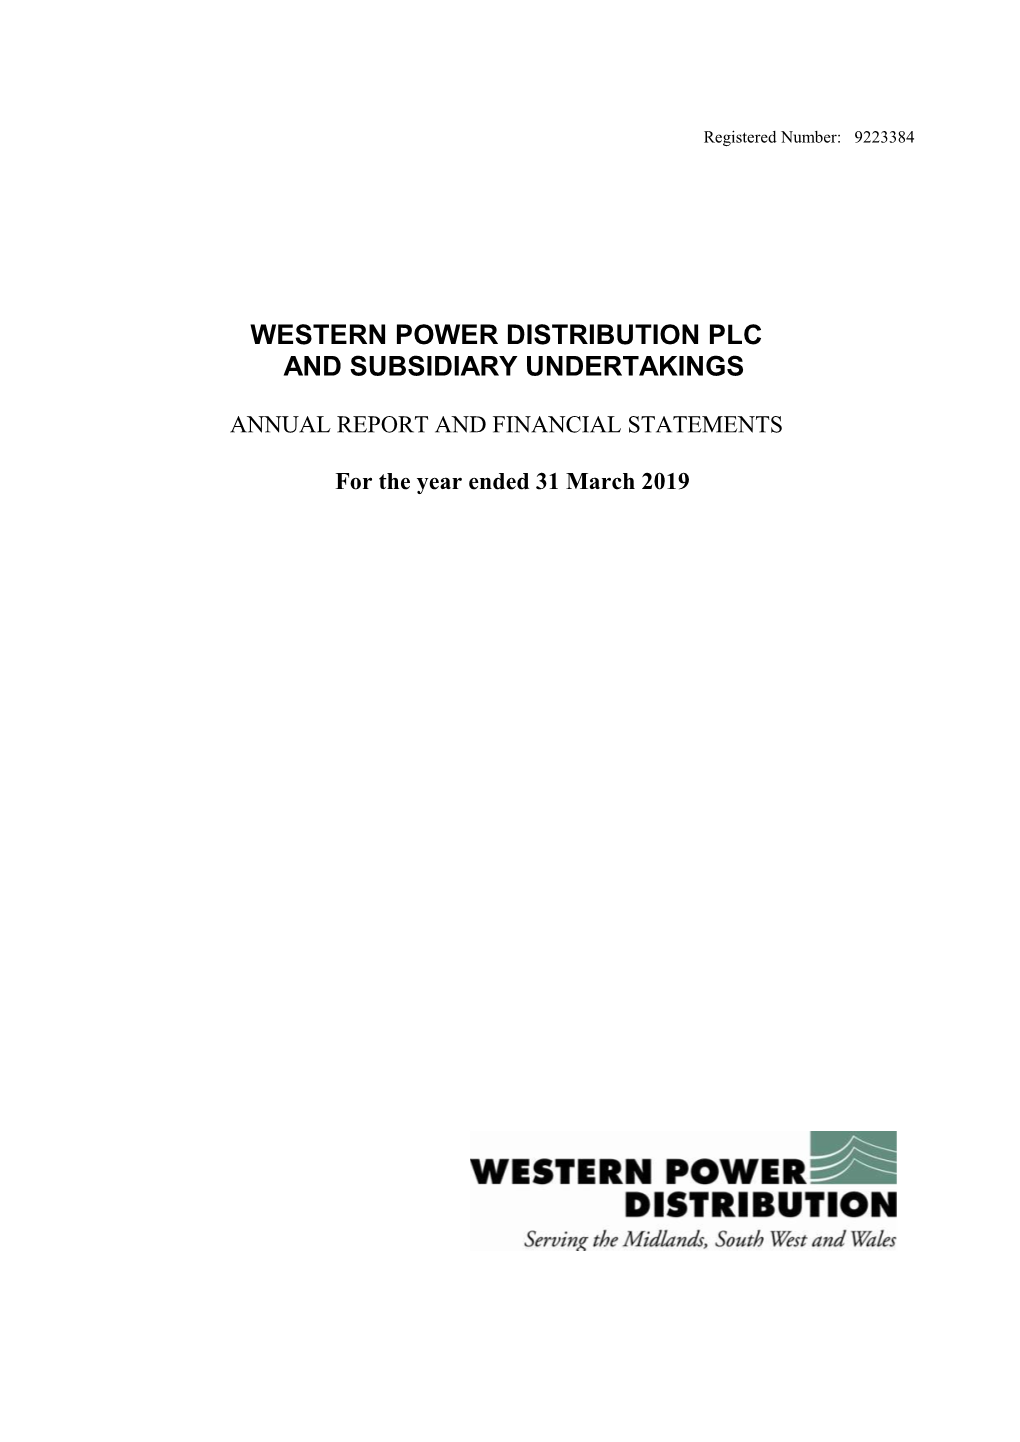 Western Power Distribution Plc and Subsidiary Undertakings